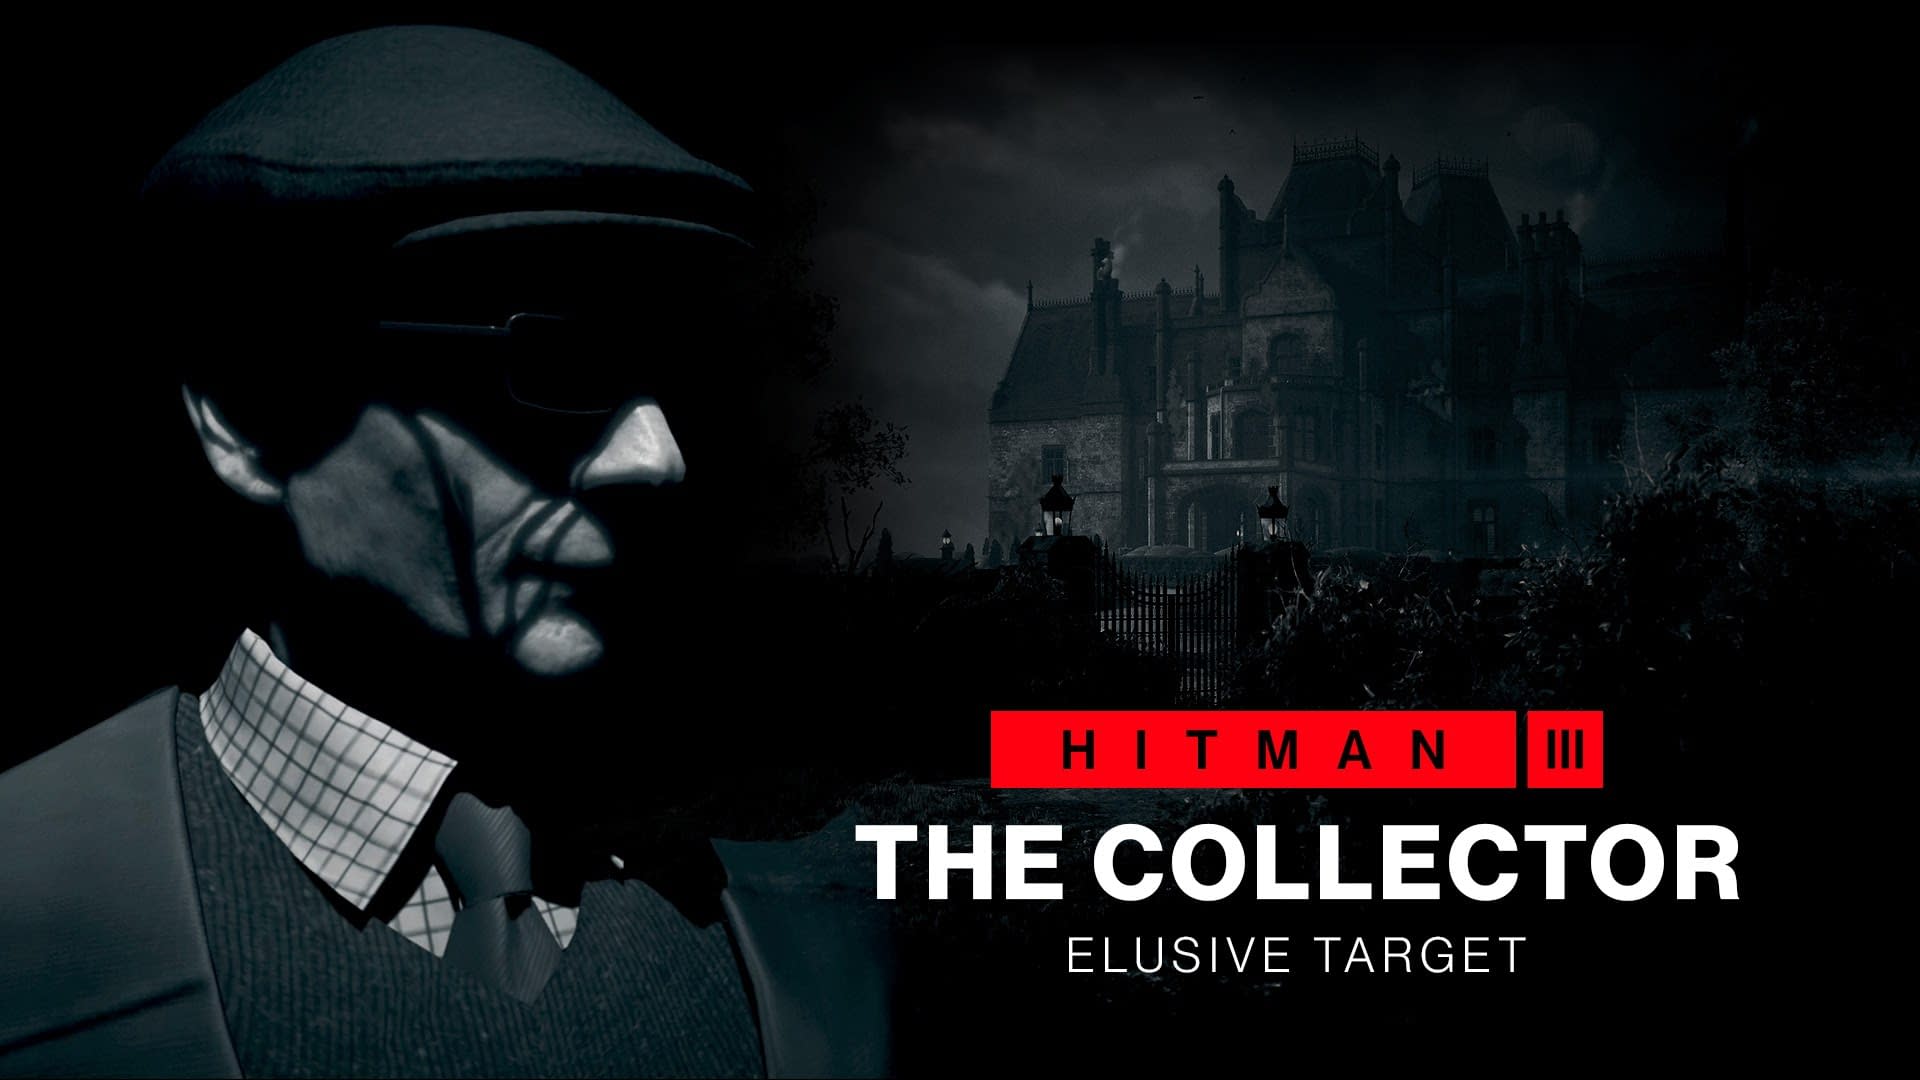 Hitman 3 Got Free Starter Pack Offering First Mission